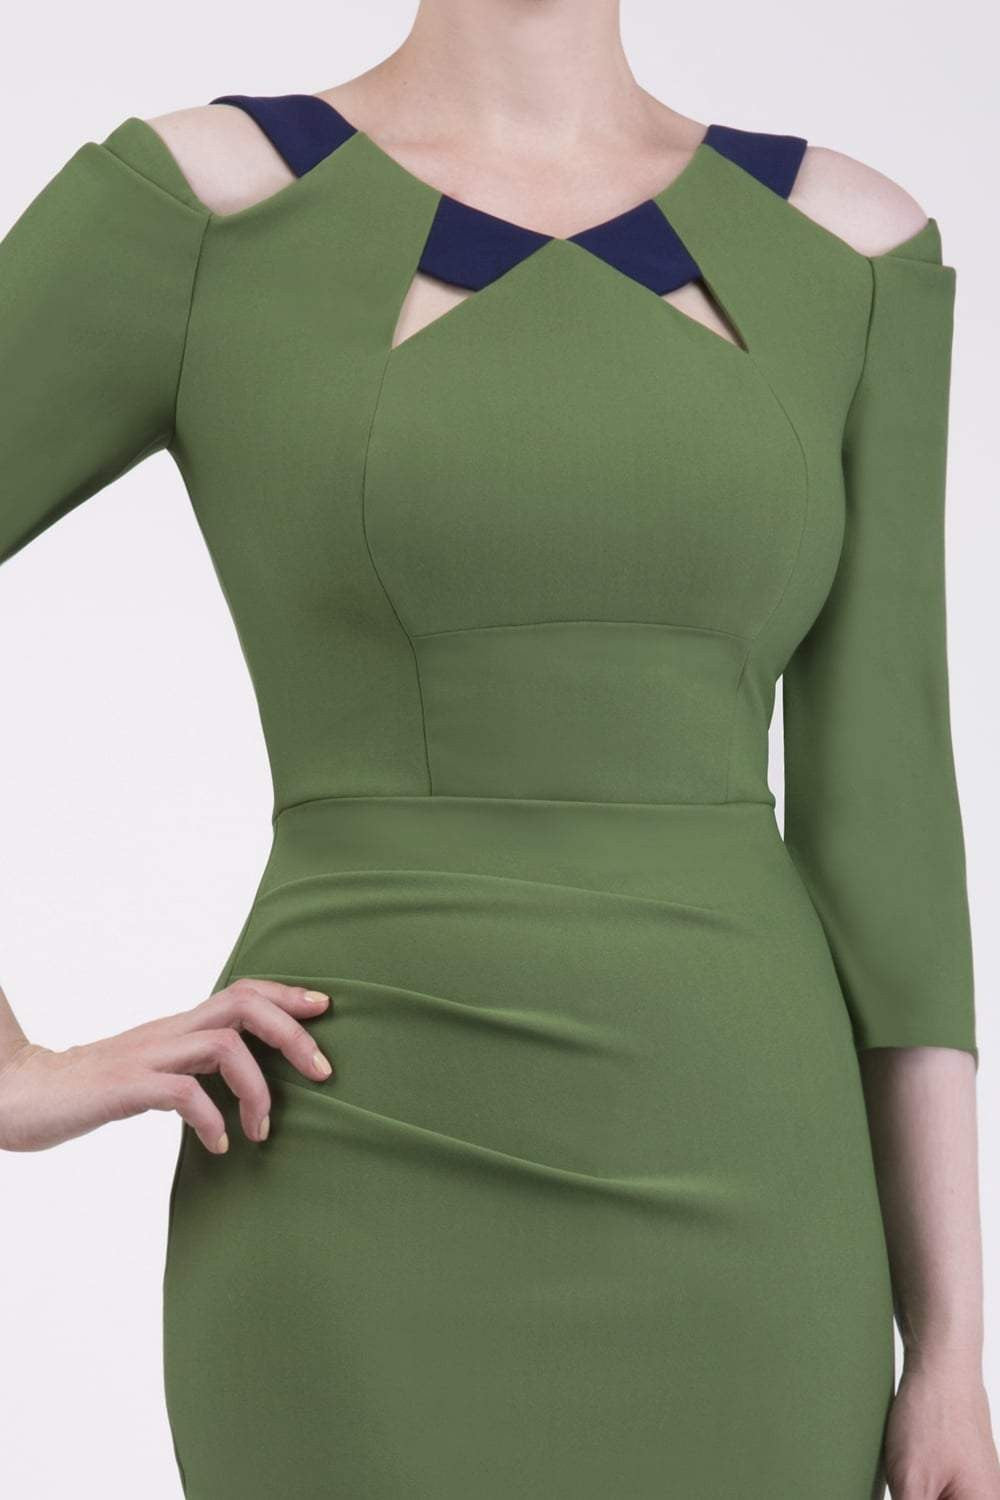 Model wearing the Diva Carolina ¾ sleeve Dress with cut out neckline detail in vineyard green and navy front image